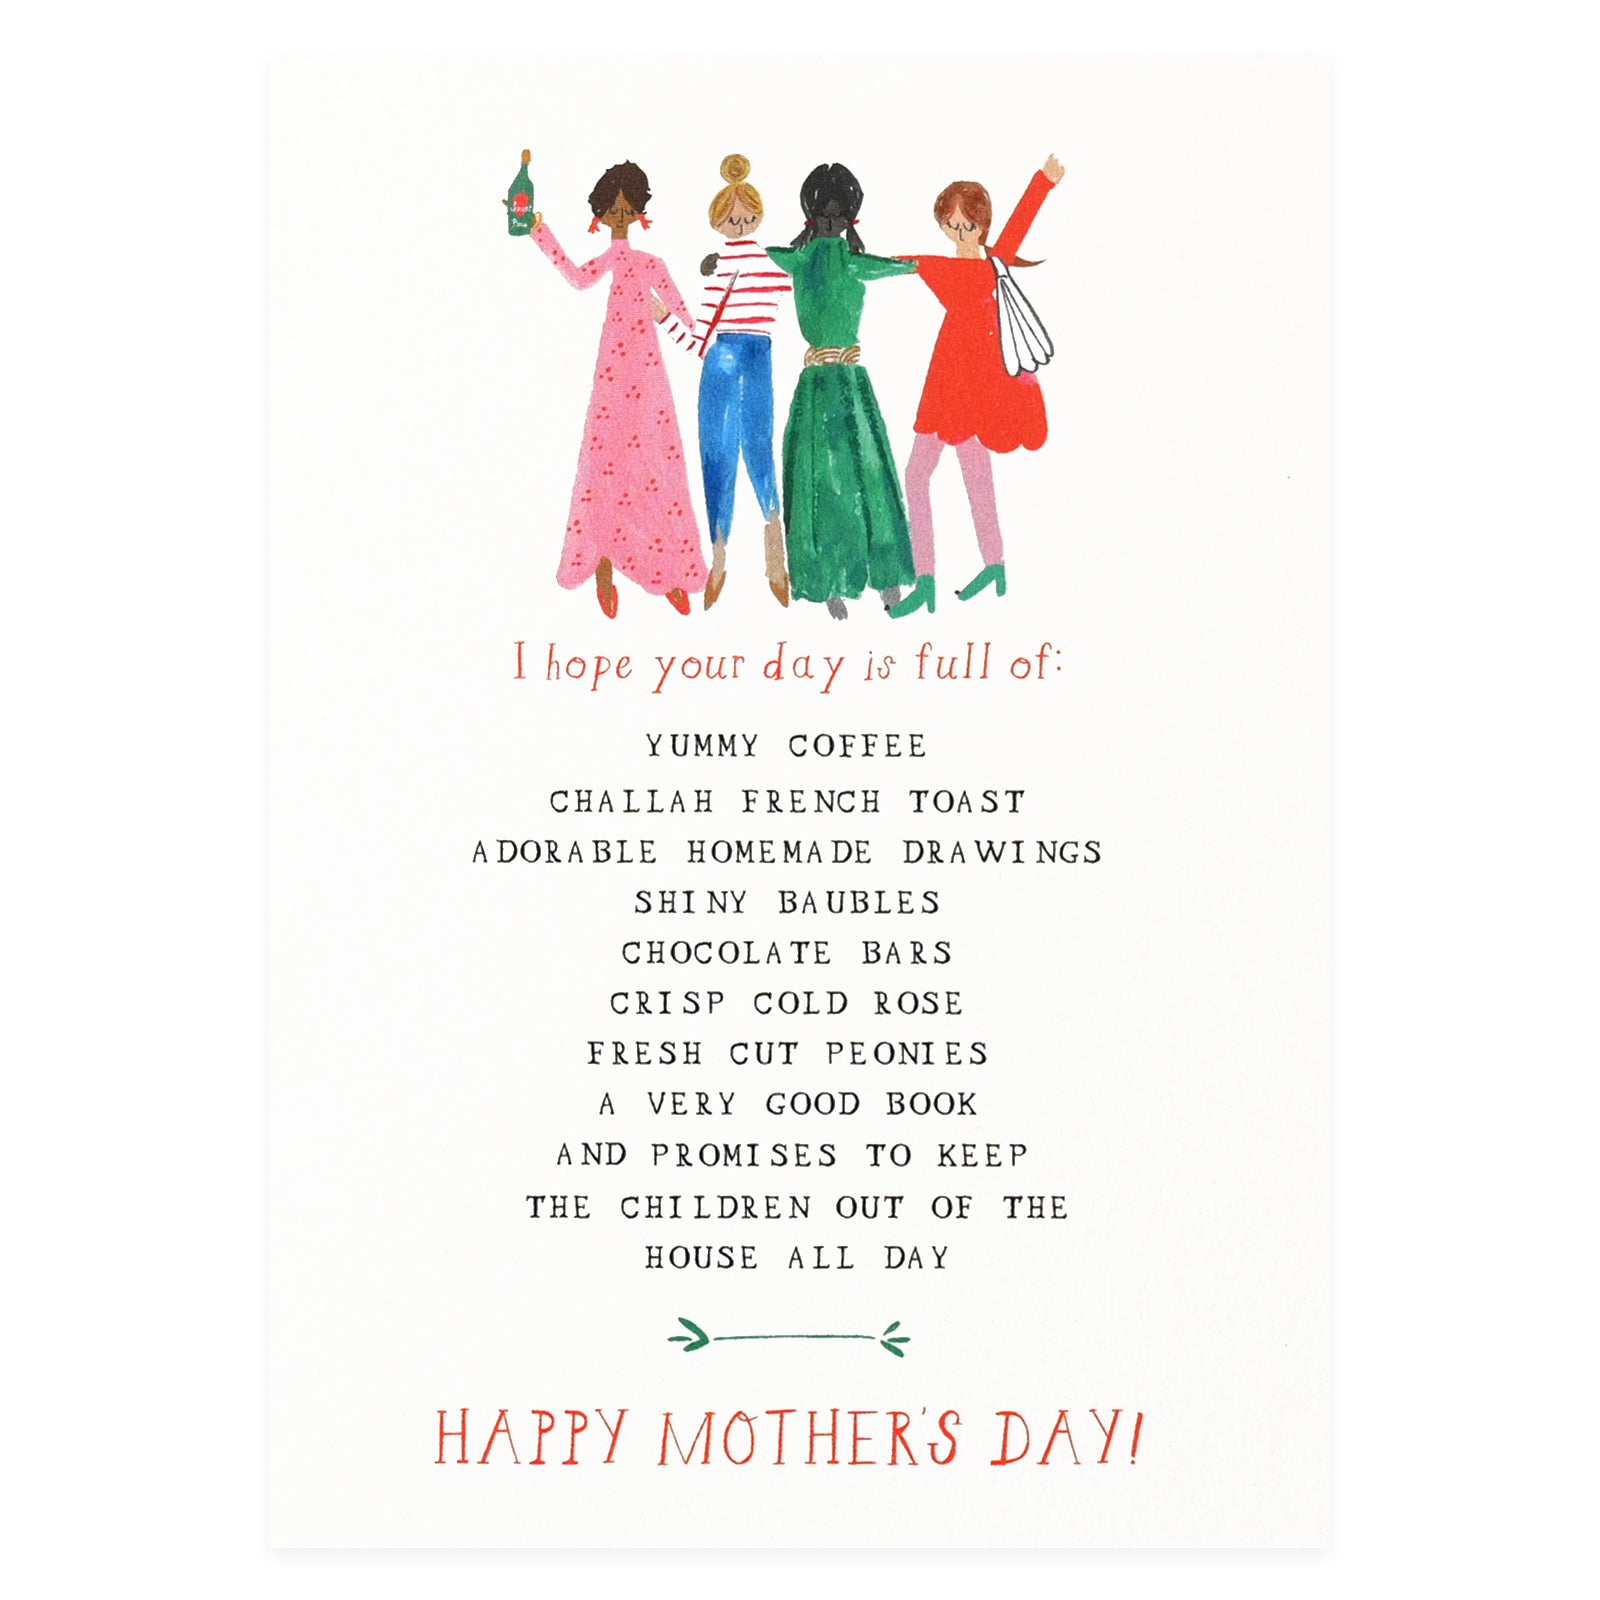 Mr. Boddington's Studio Have A Good Morning Mother's Day Card 